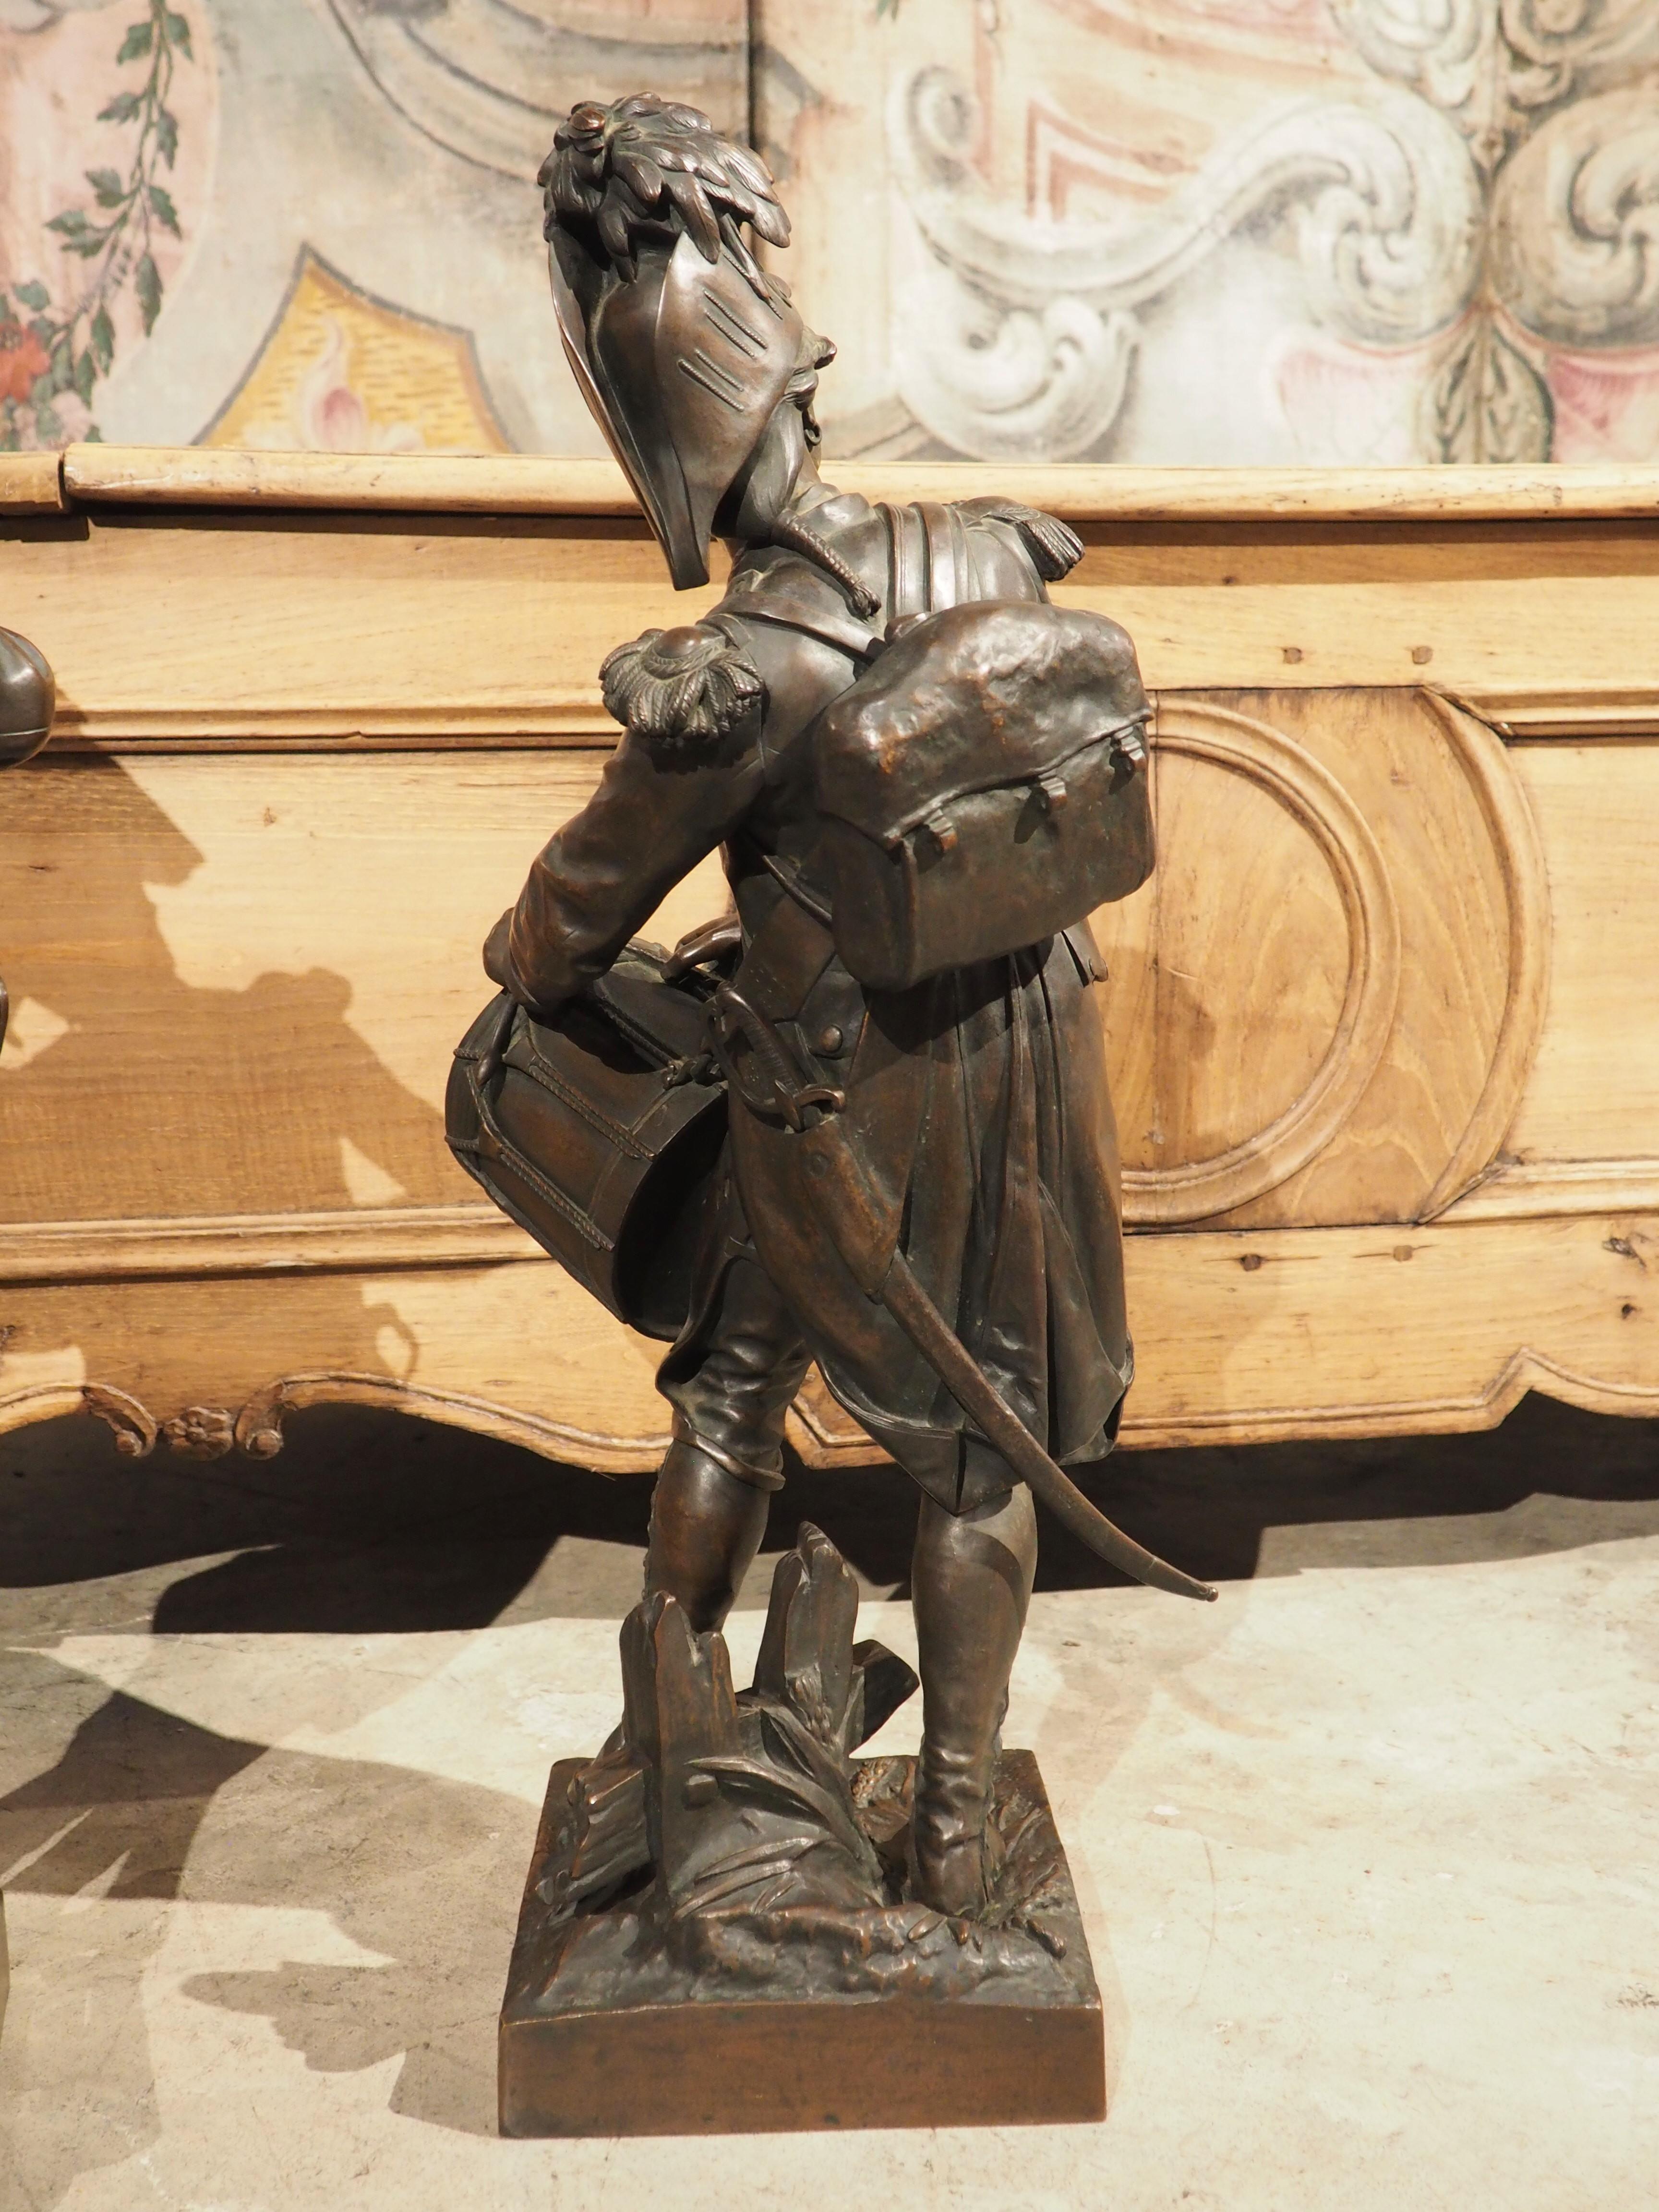 Standing over 2 feet tall, these high quality bronze statues depict soldiers during the French revolutionary wars. They are labeled and signed Dumaige (French sculptor, Etienne-Henry Dumaige 1830-1888). The statues show incredible detail, excellent